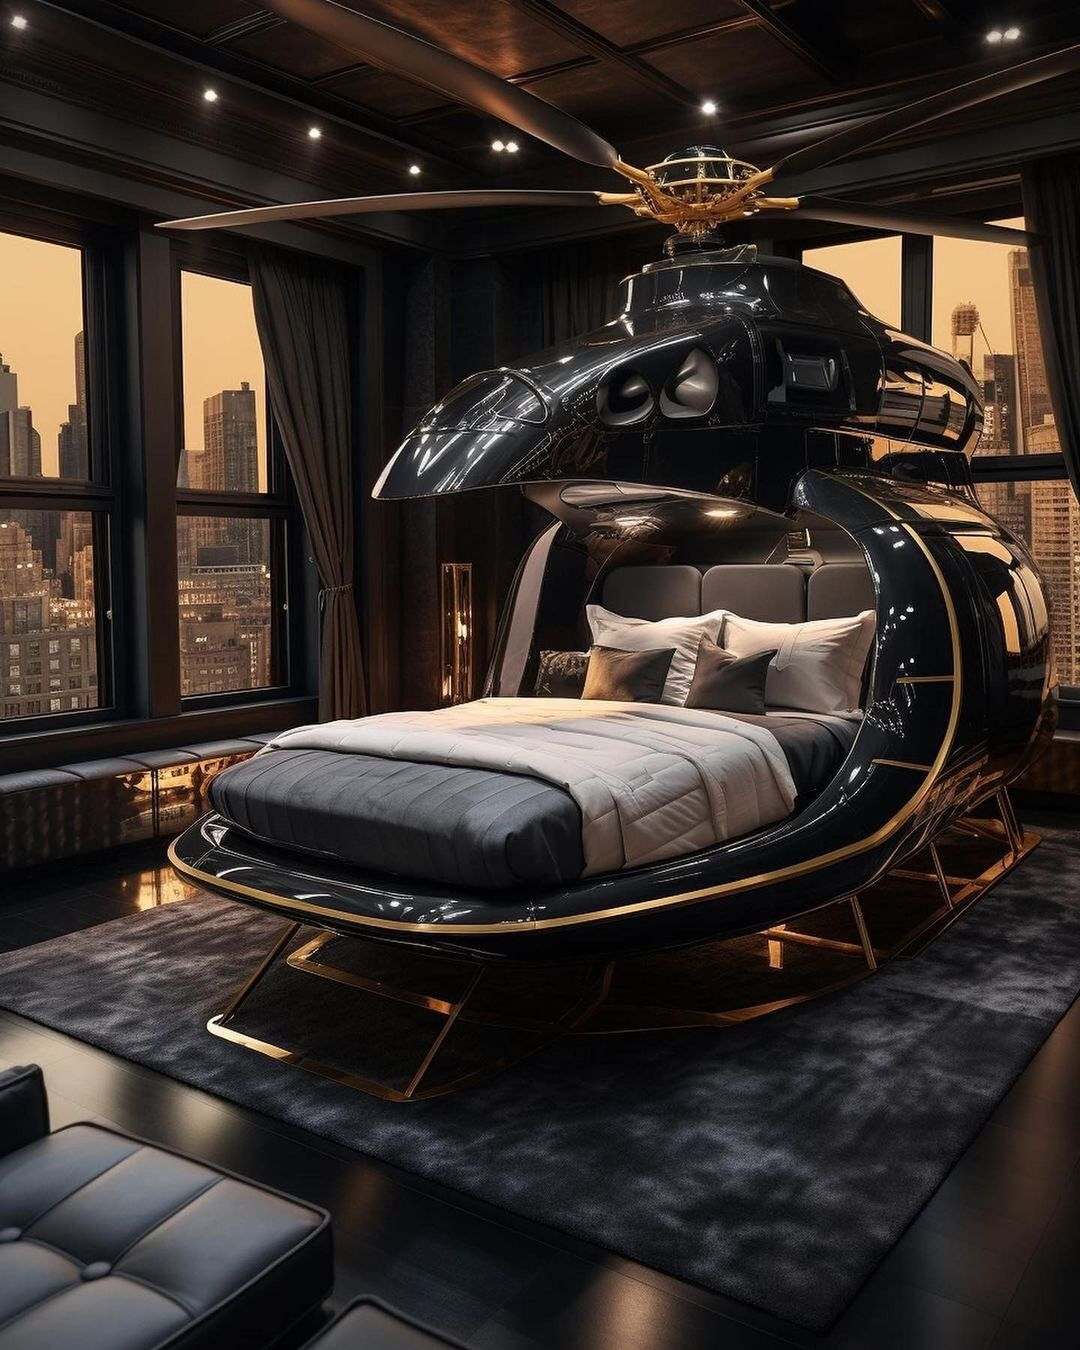 Helicopter Beds: Luxury and Uniqueness for Your Bedroom Space